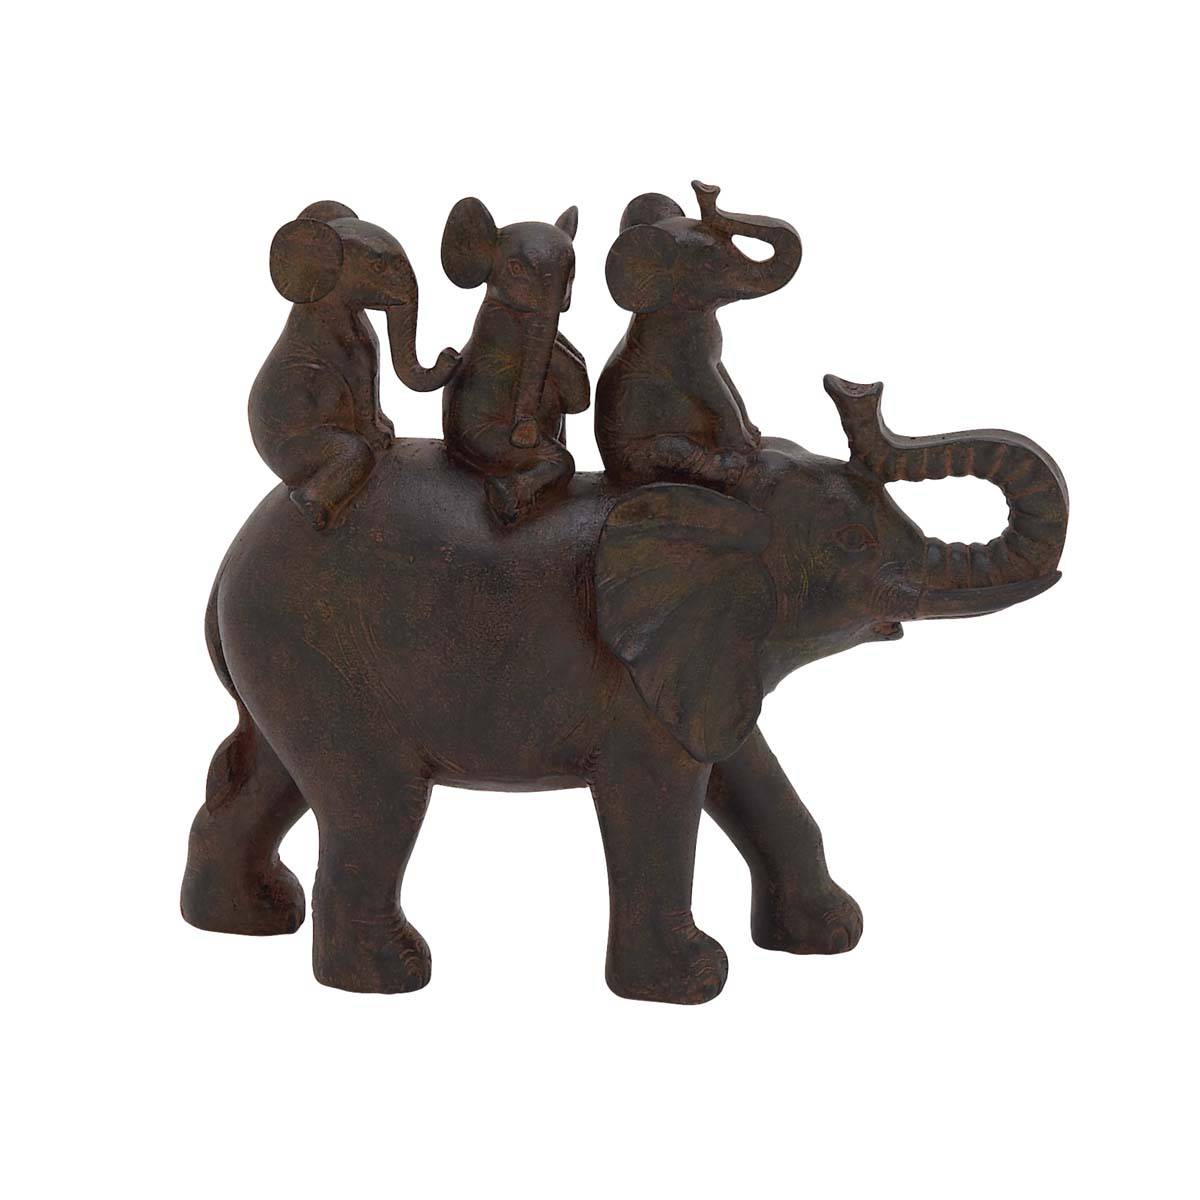 9th & Pike(R) Brown Polystone 3 Baby Elephants Sculpture